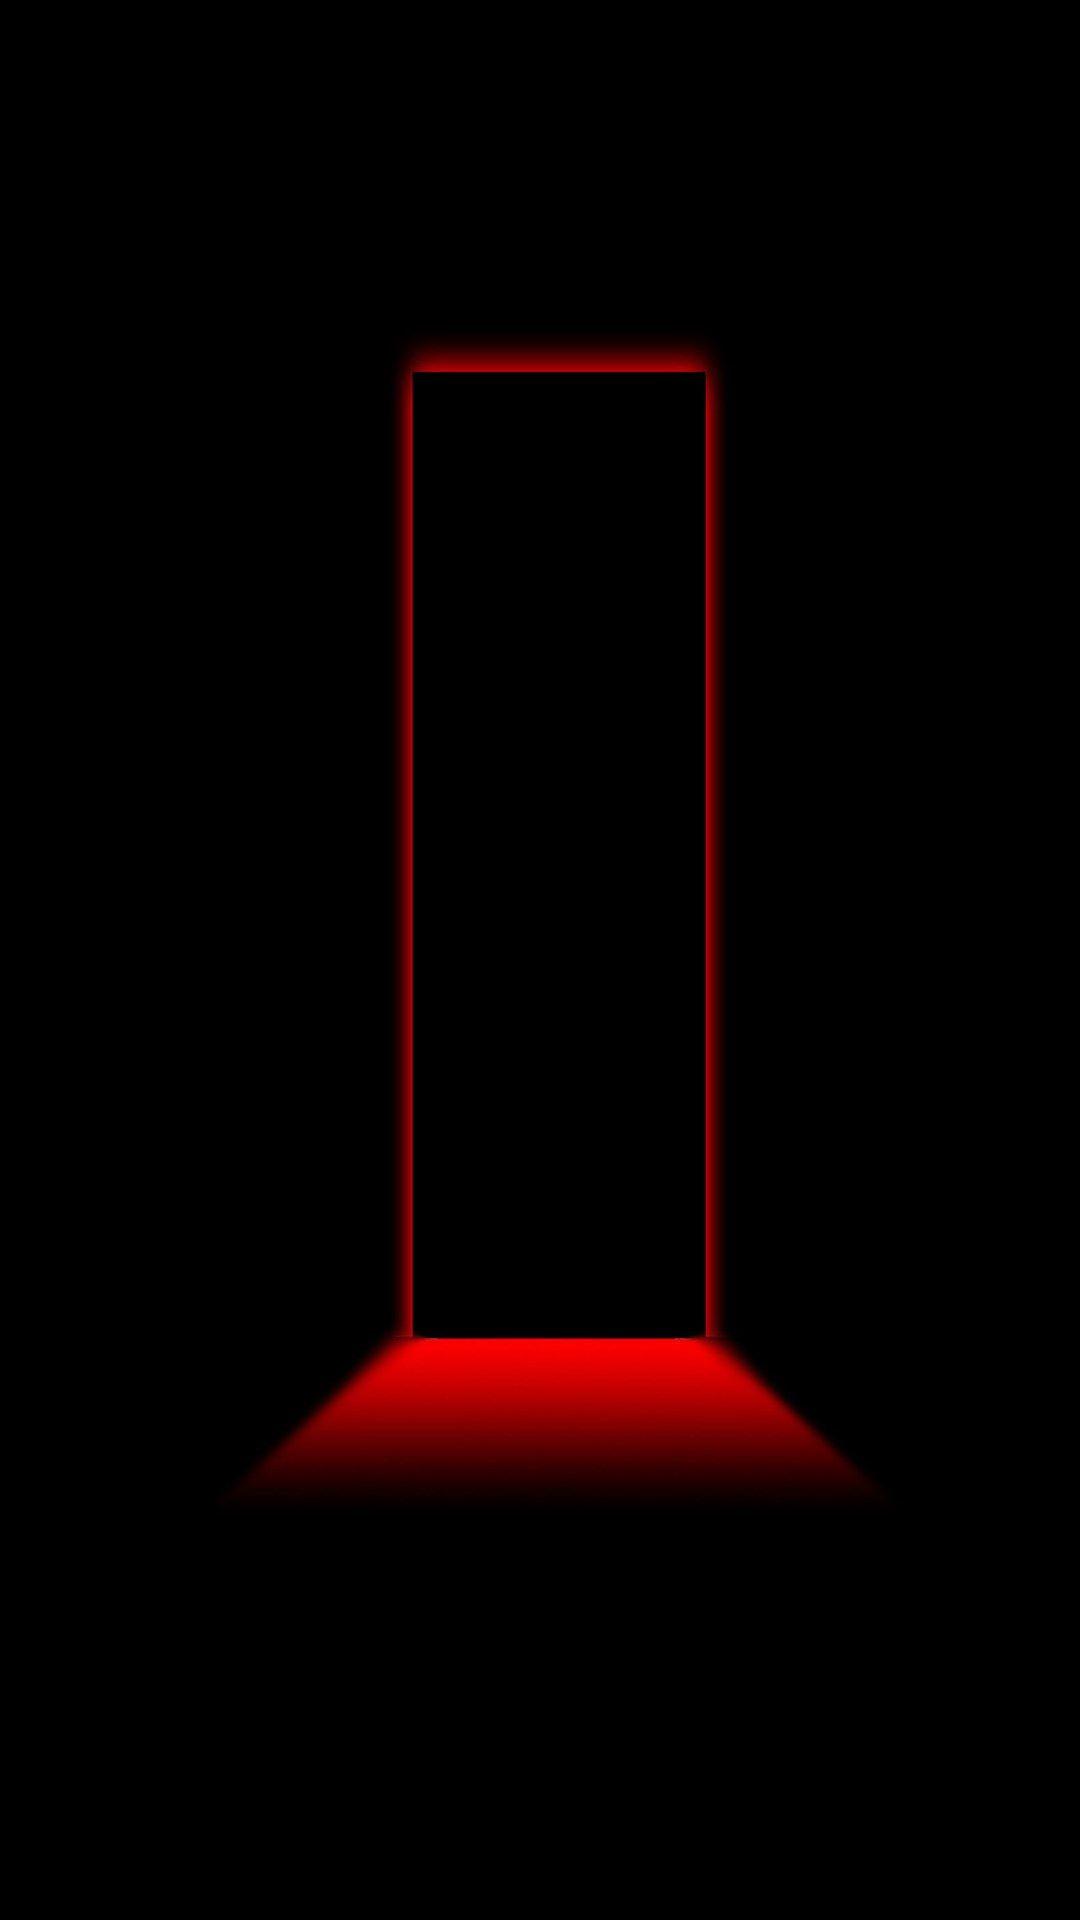 3D black and red line iphone 5s HD wallpaper free download